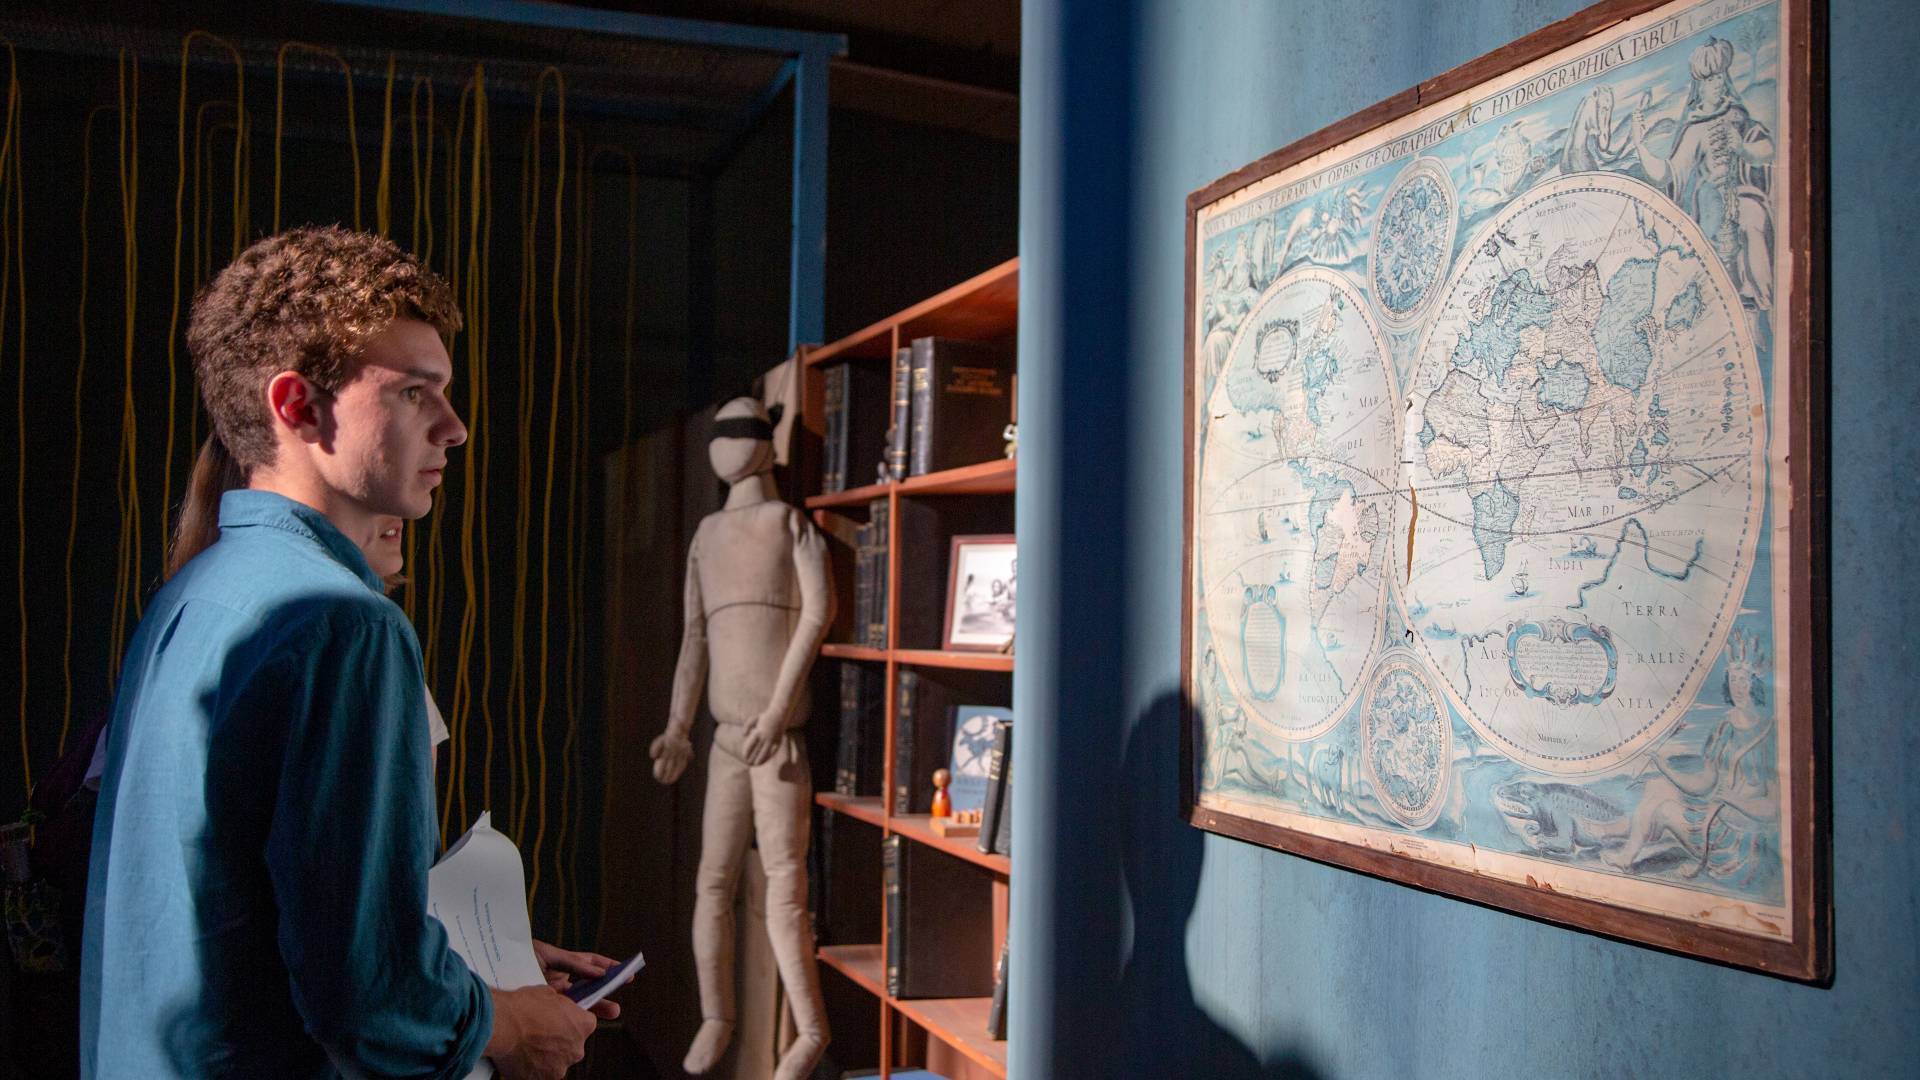 Students looking at ancient map in art installation in Athens, Greece